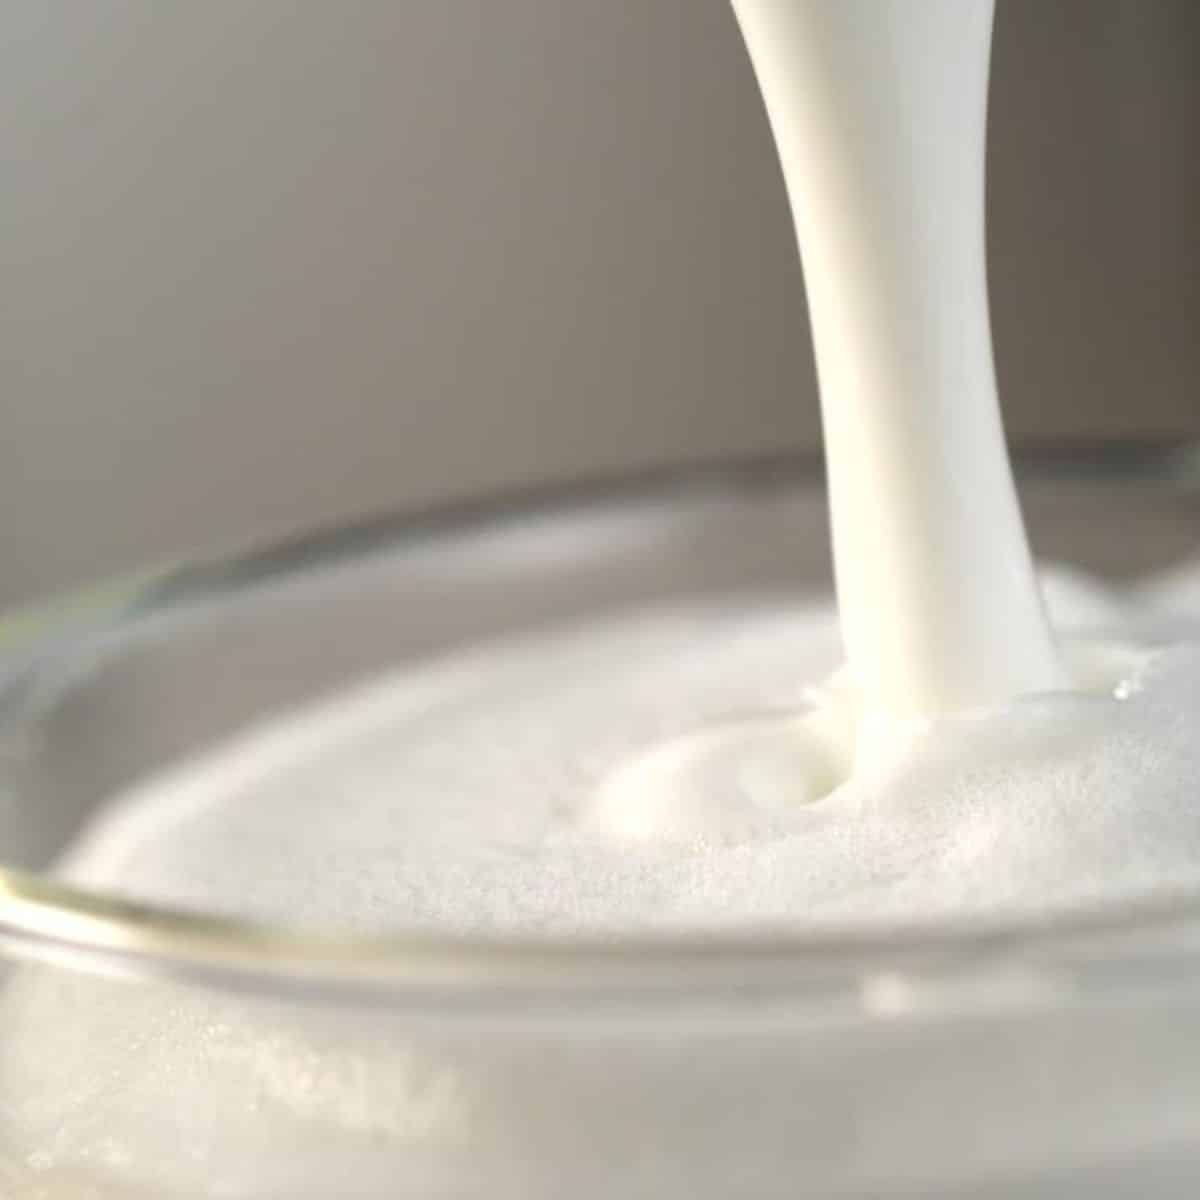 Heavy cream or milk being poured into a glass.